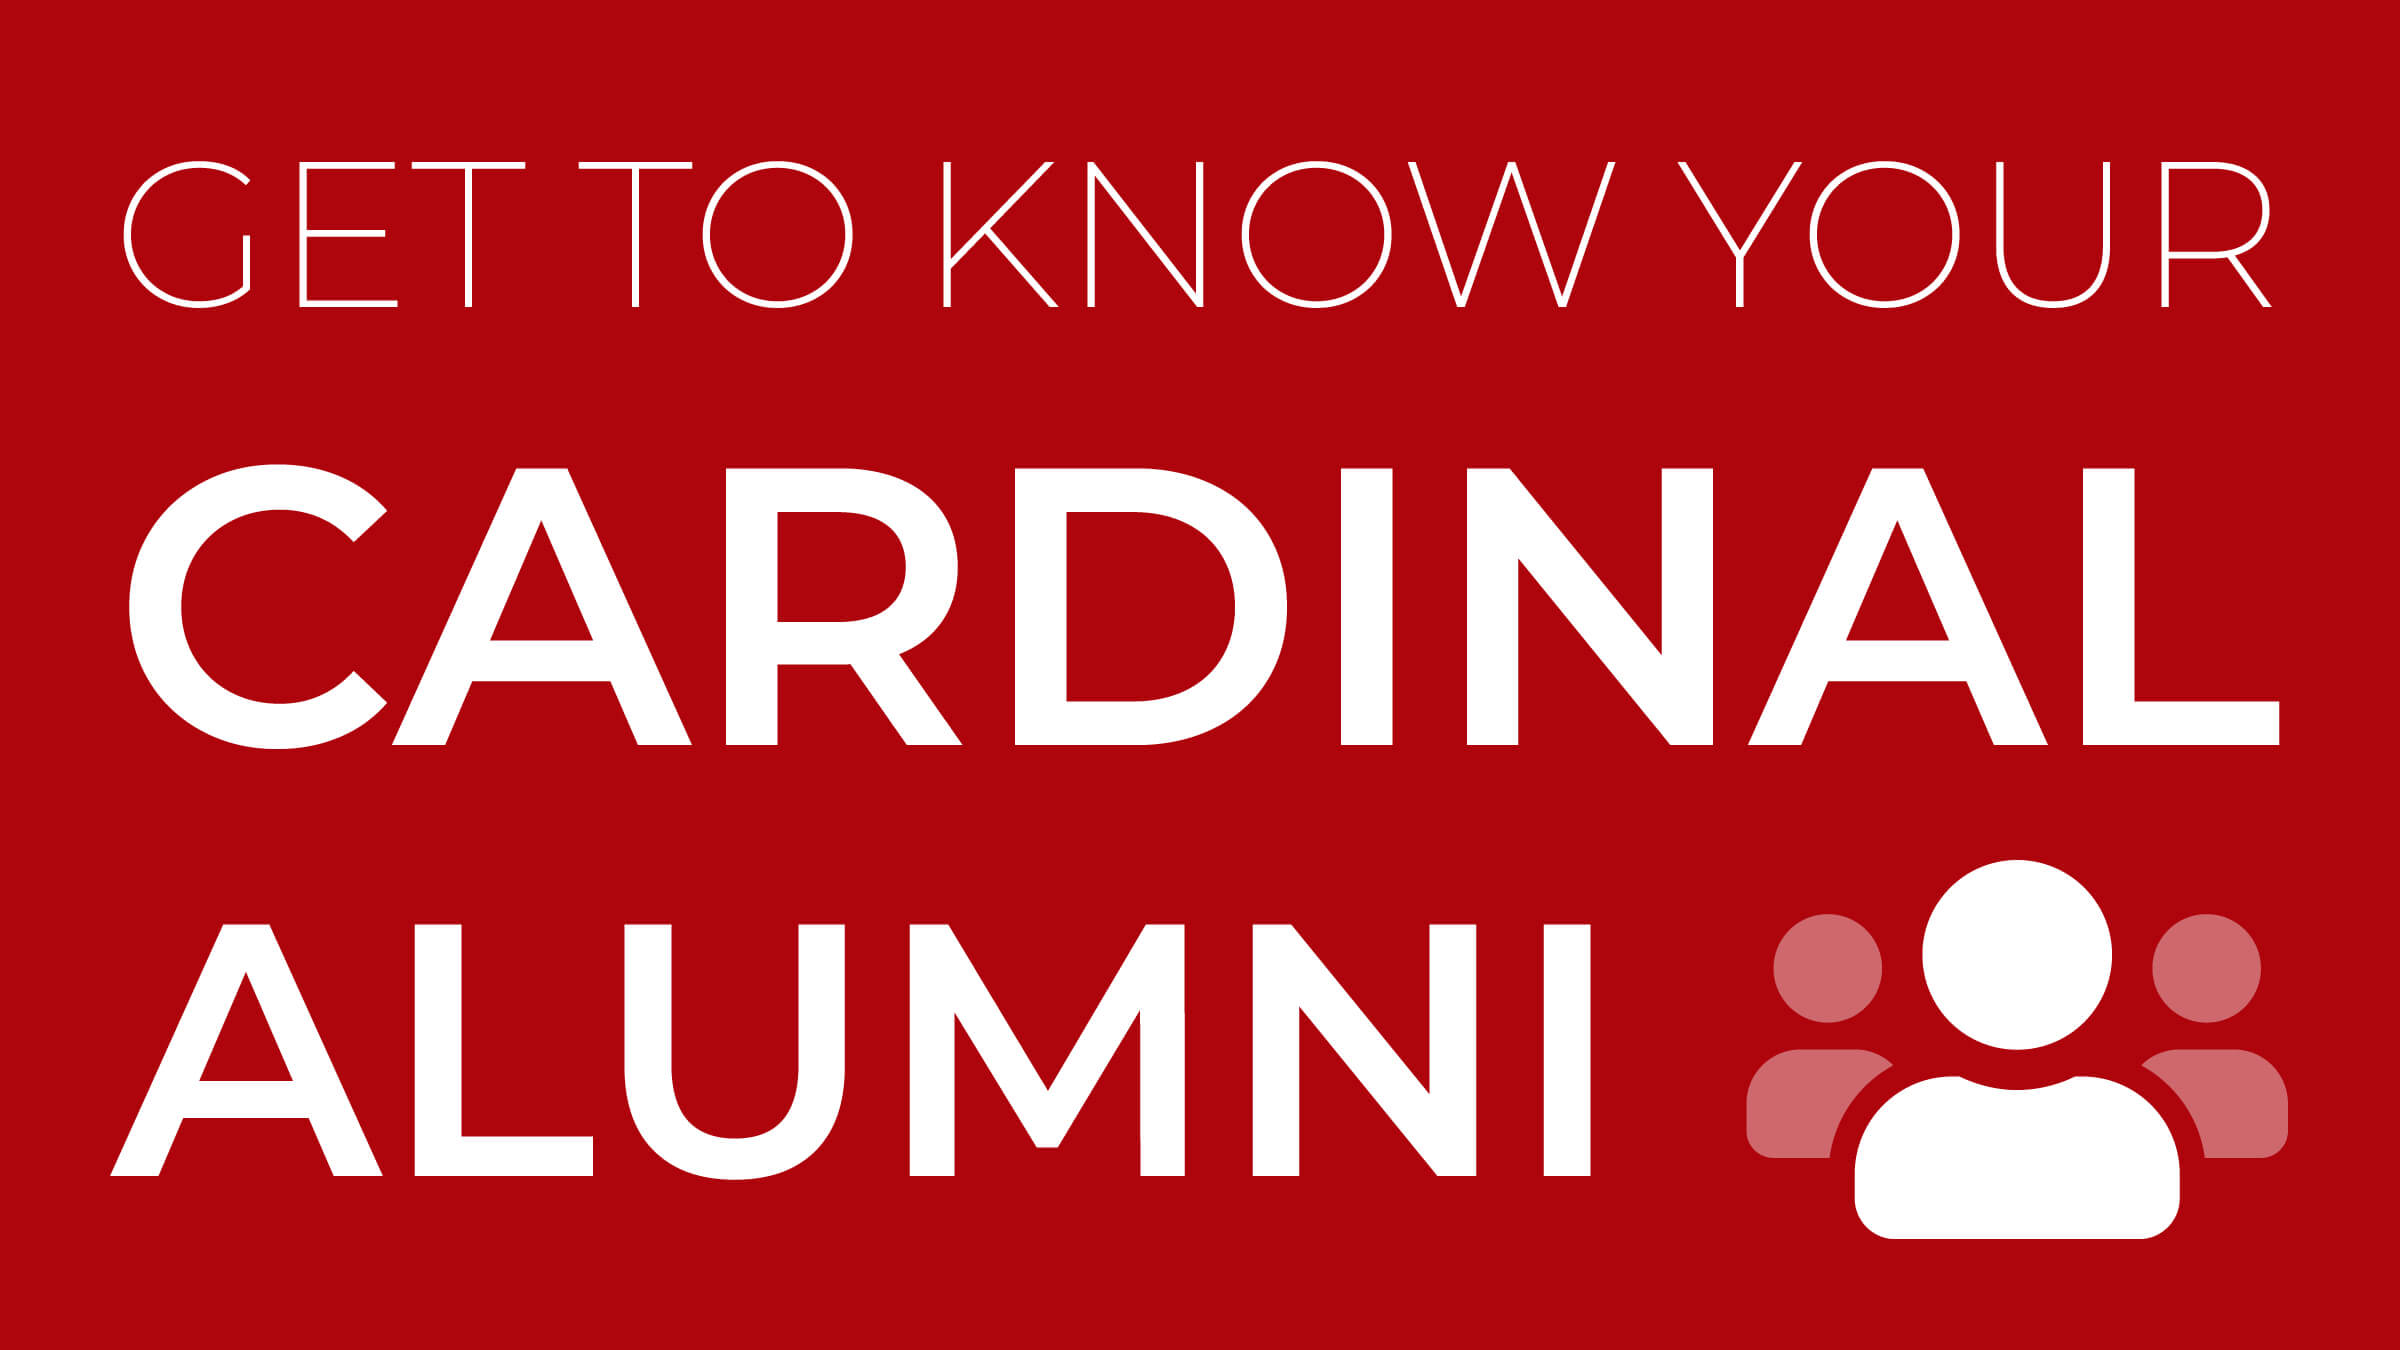 Get To Know Your Cardinal Alumni graphic